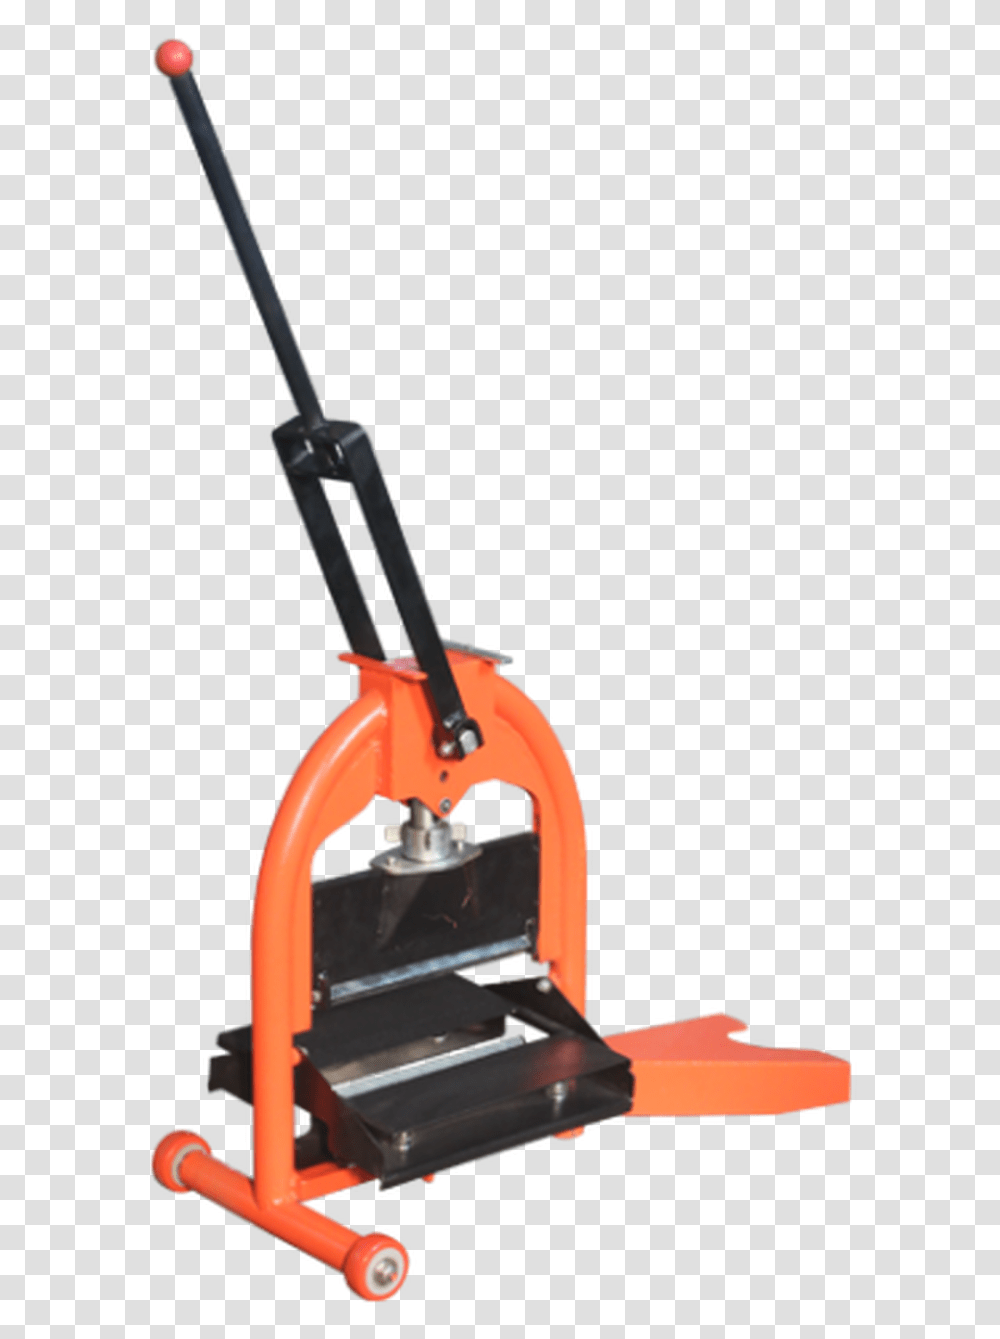 Abaco Stone Splitter Pallet Jack, Appliance, Vacuum Cleaner, Lawn Mower, Tool Transparent Png